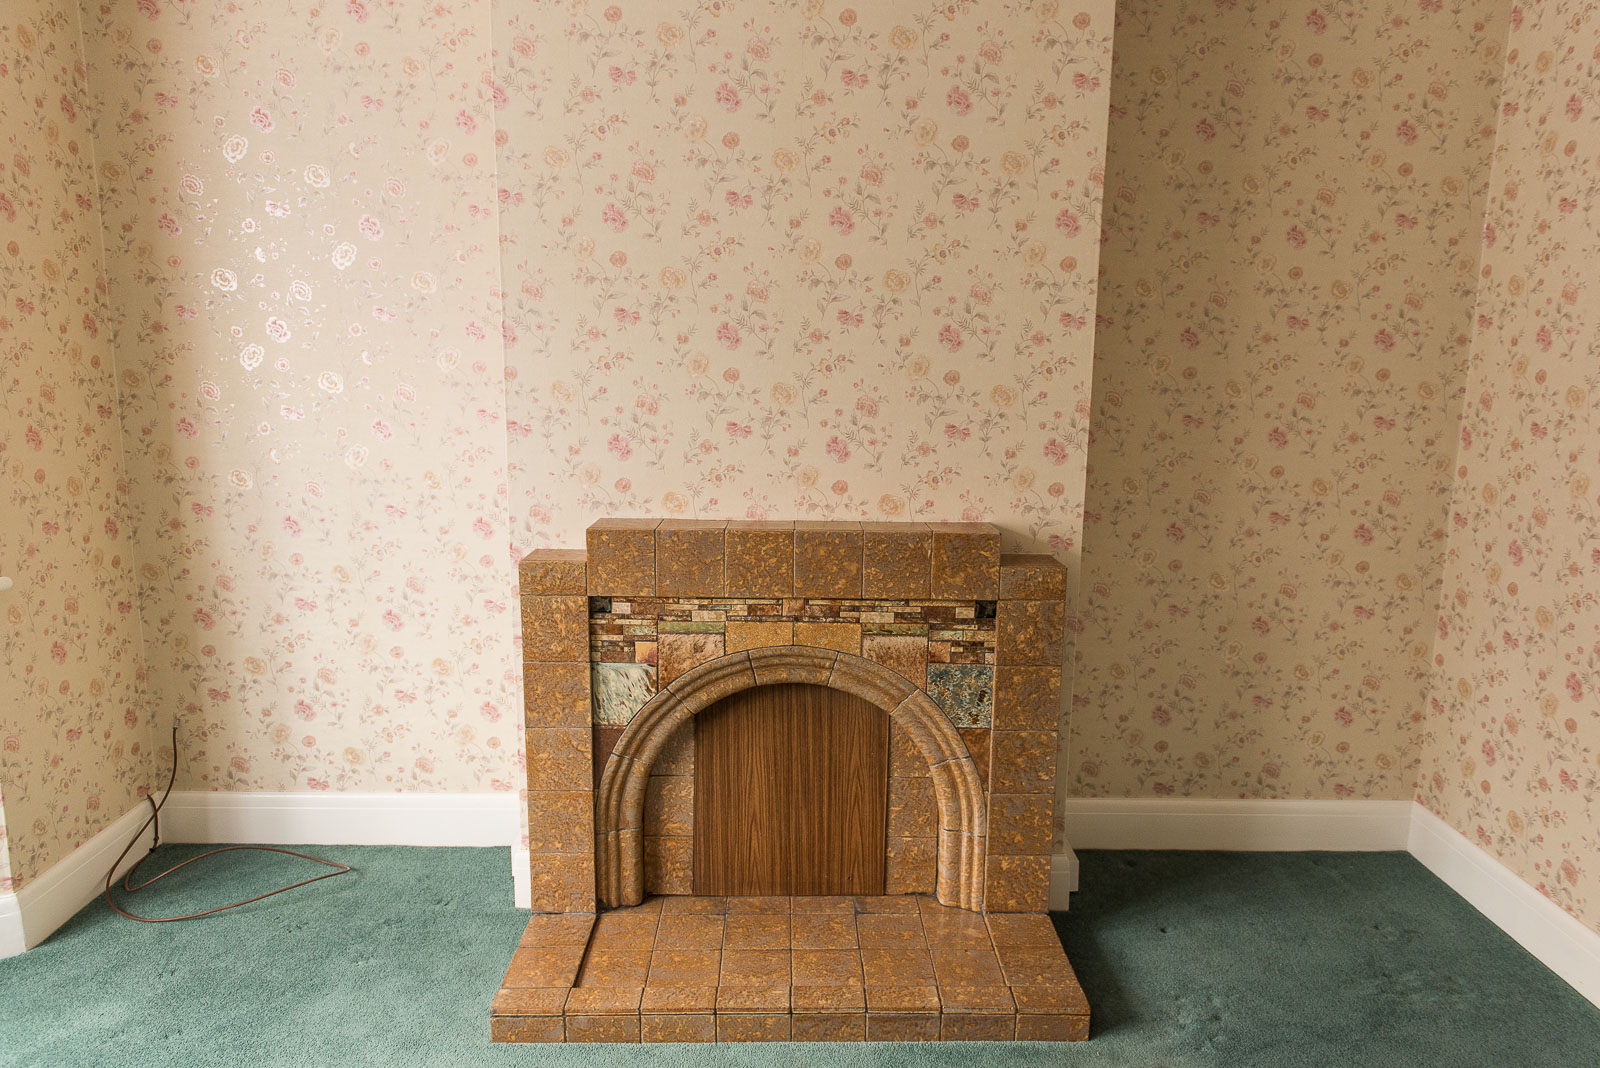 1930s living room uk - ORIGINAL 1930s FIRE PLACE, ANY TAKERS?